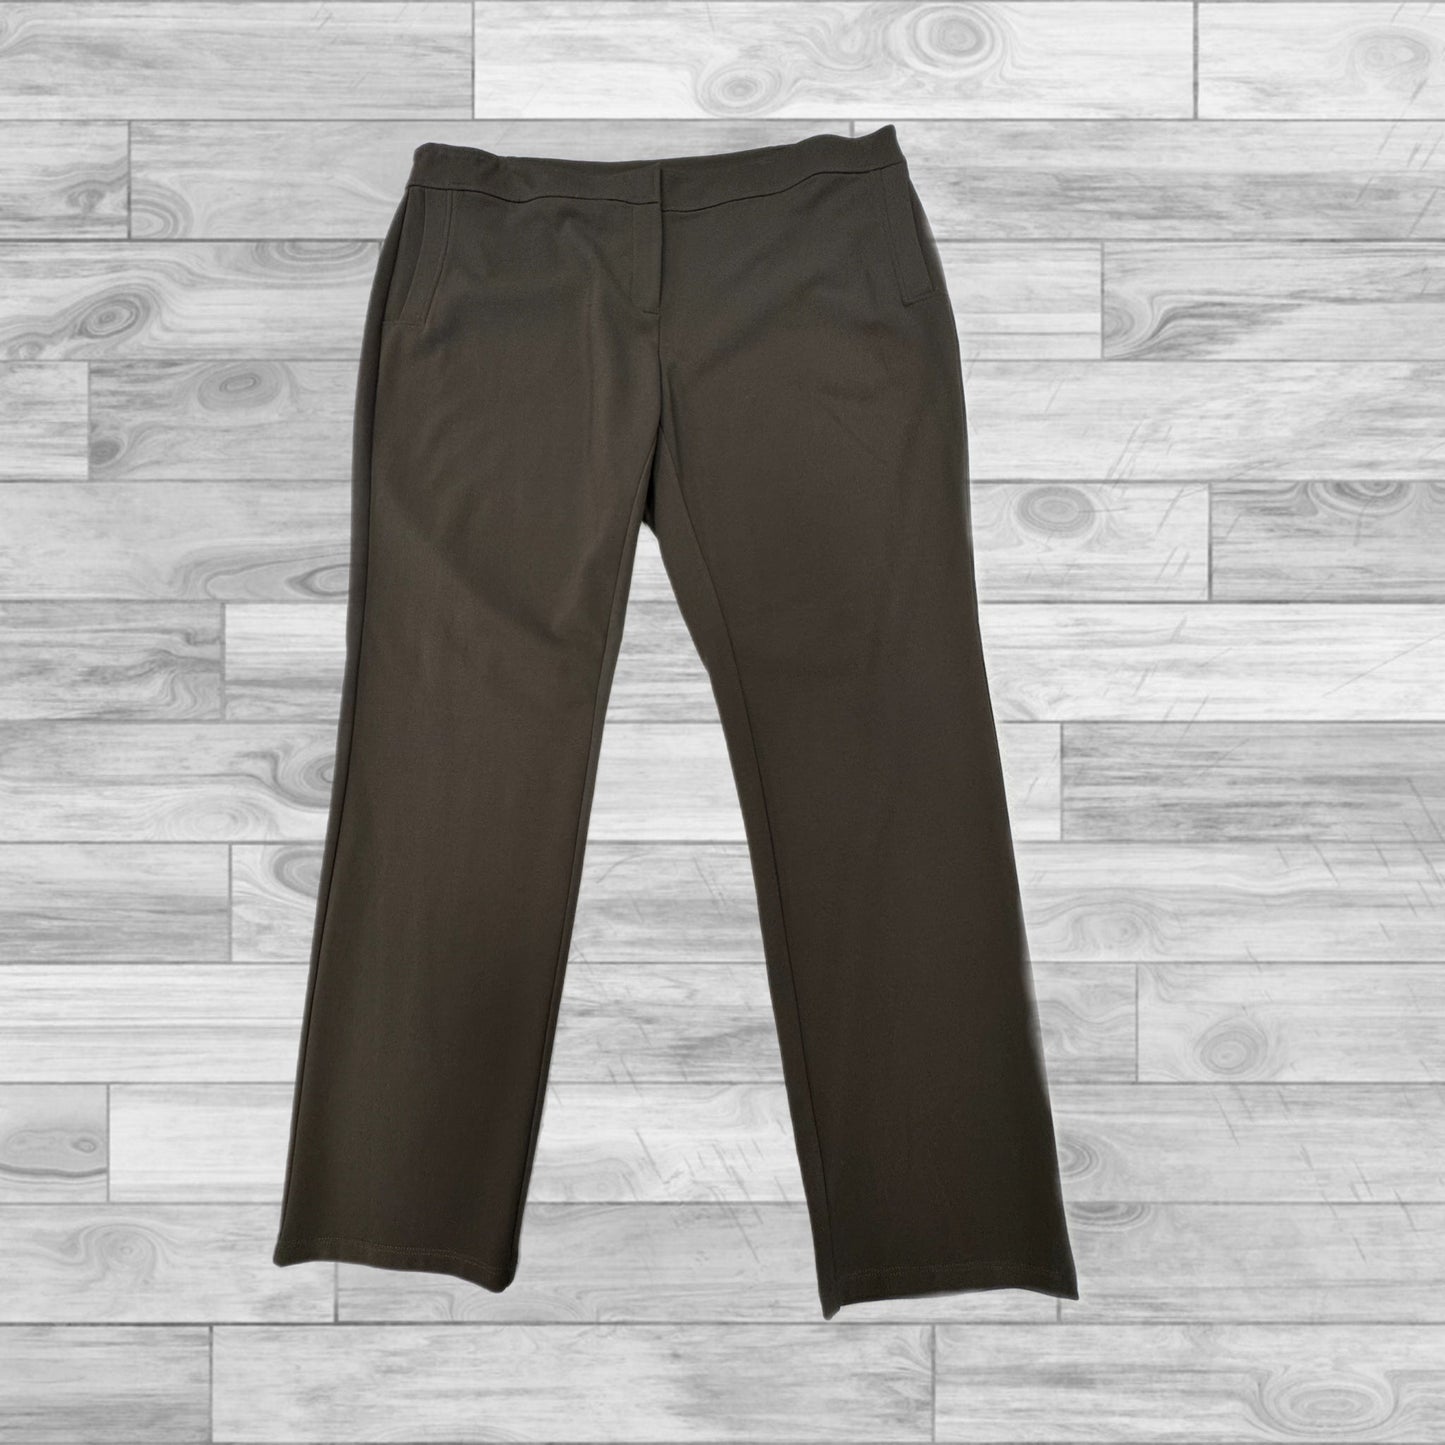 Brown Pants Eileen Fisher, Size 2x